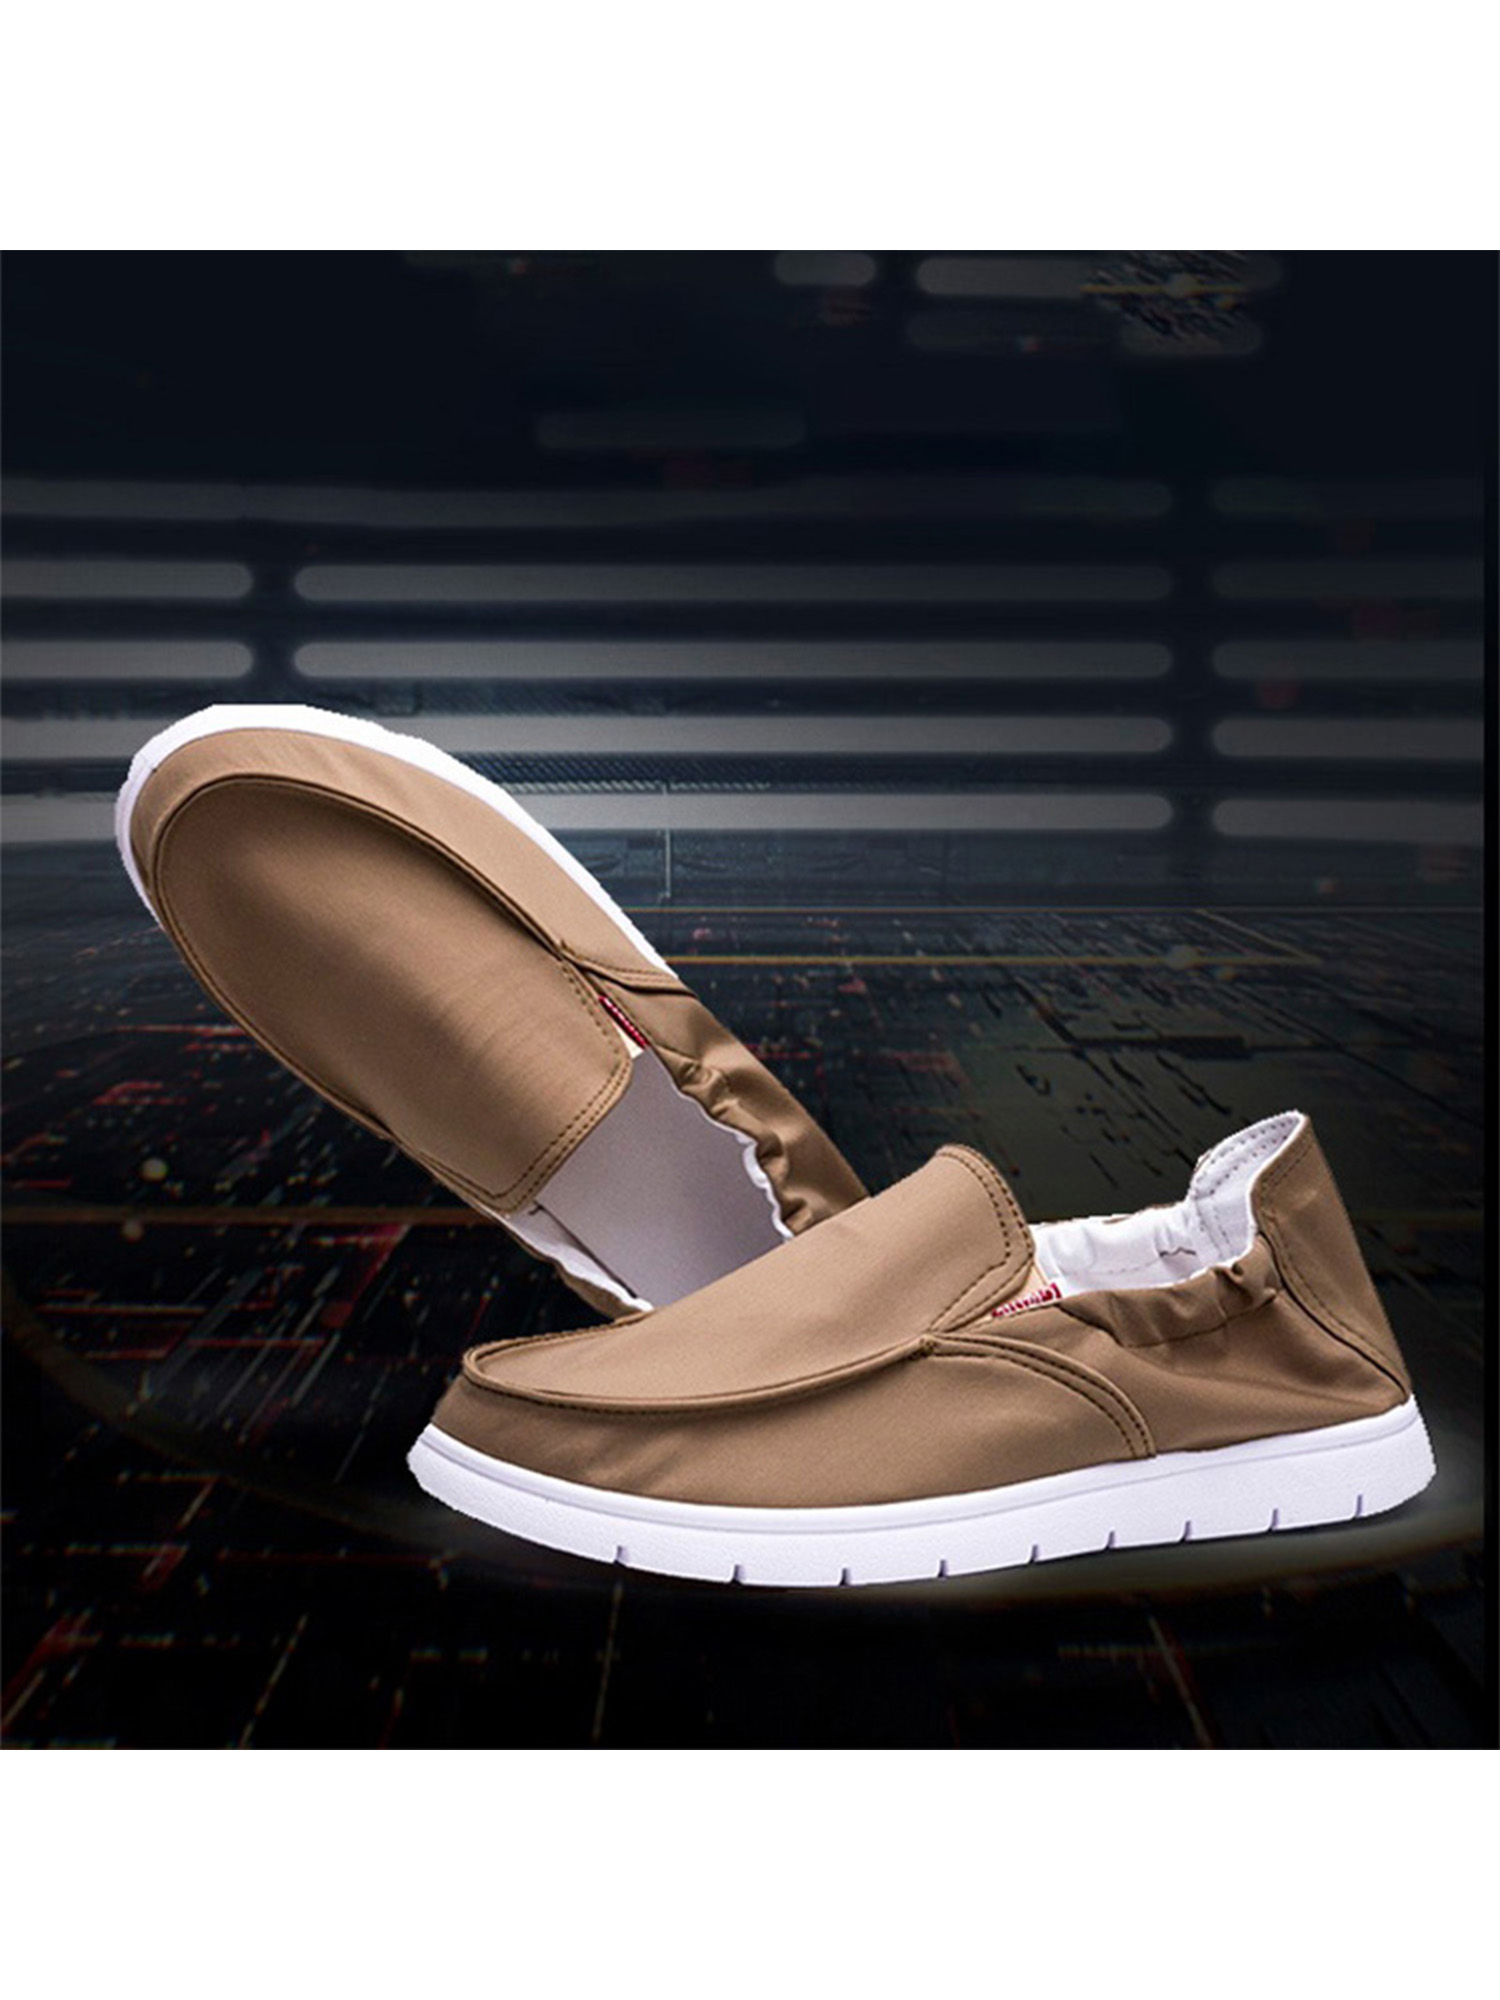 UKAP Casual Canvas Shoes for Men Slip On Loafers Deck Shoes Comfortable Boat Shoes Outdoor Fashion - image 3 of 8